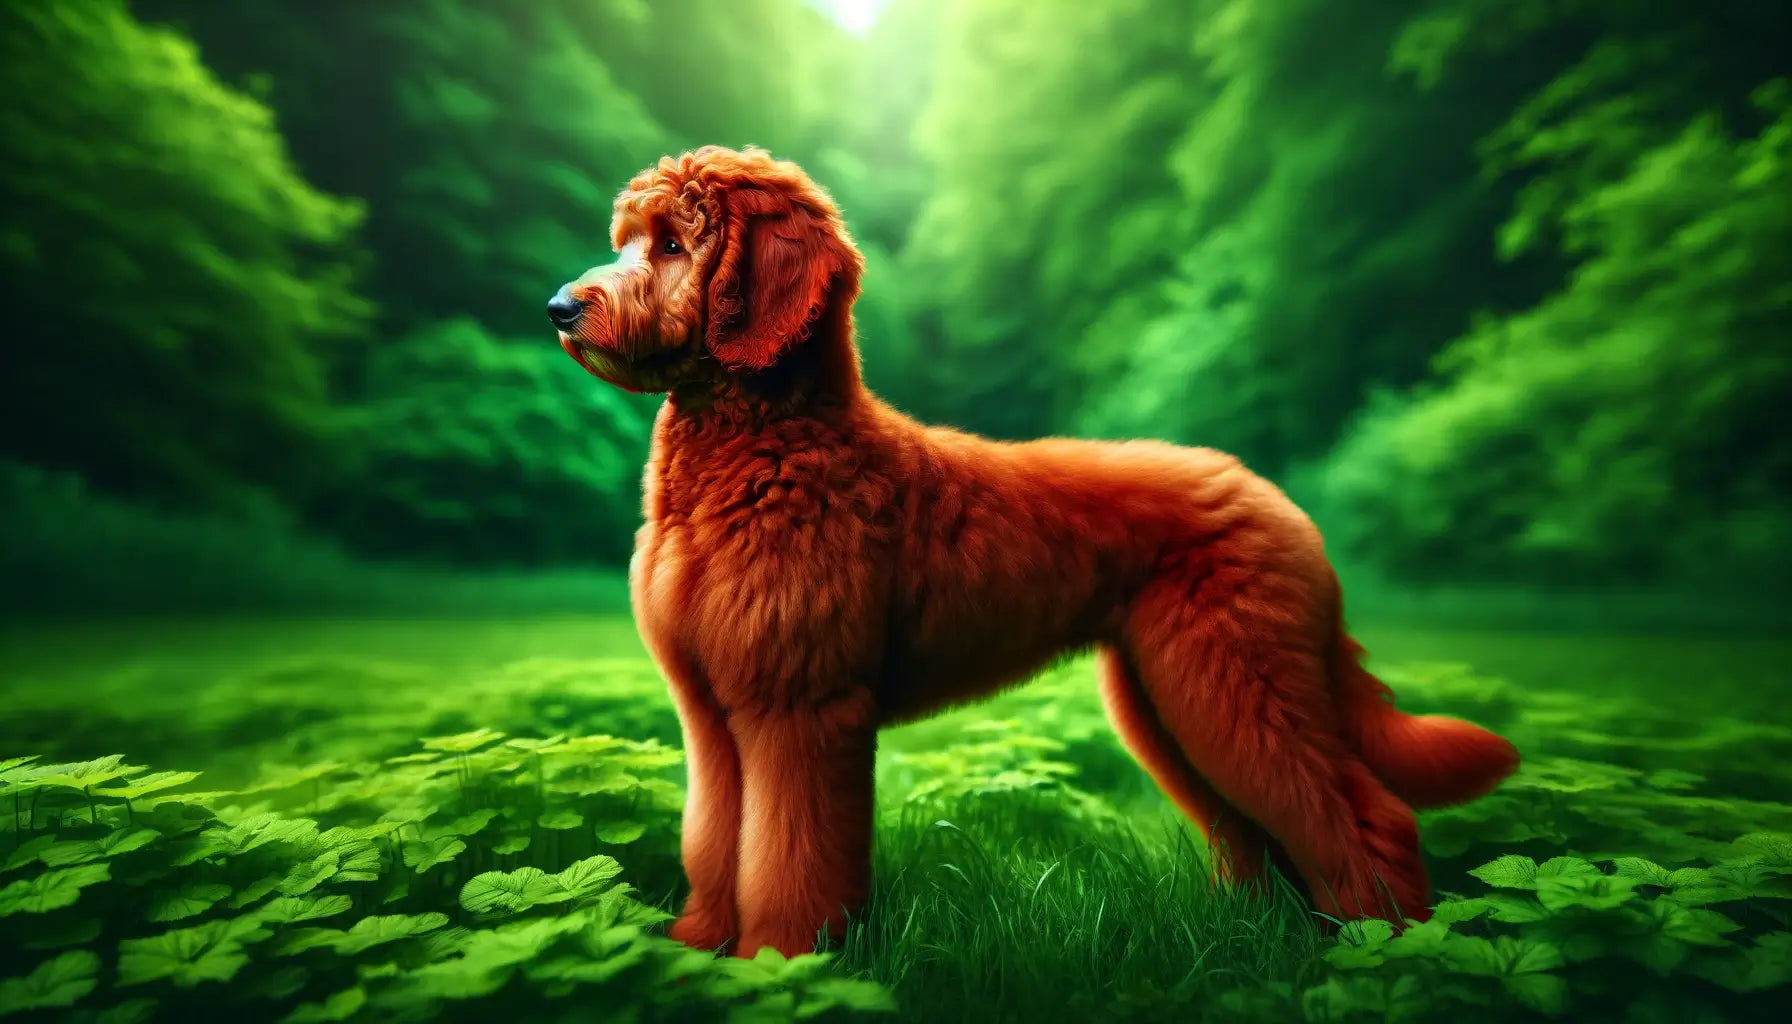 Red Goldendoodle in a vibrant green setting, standing in profile to showcase its compact muscular build and the striking red hue of its coat.